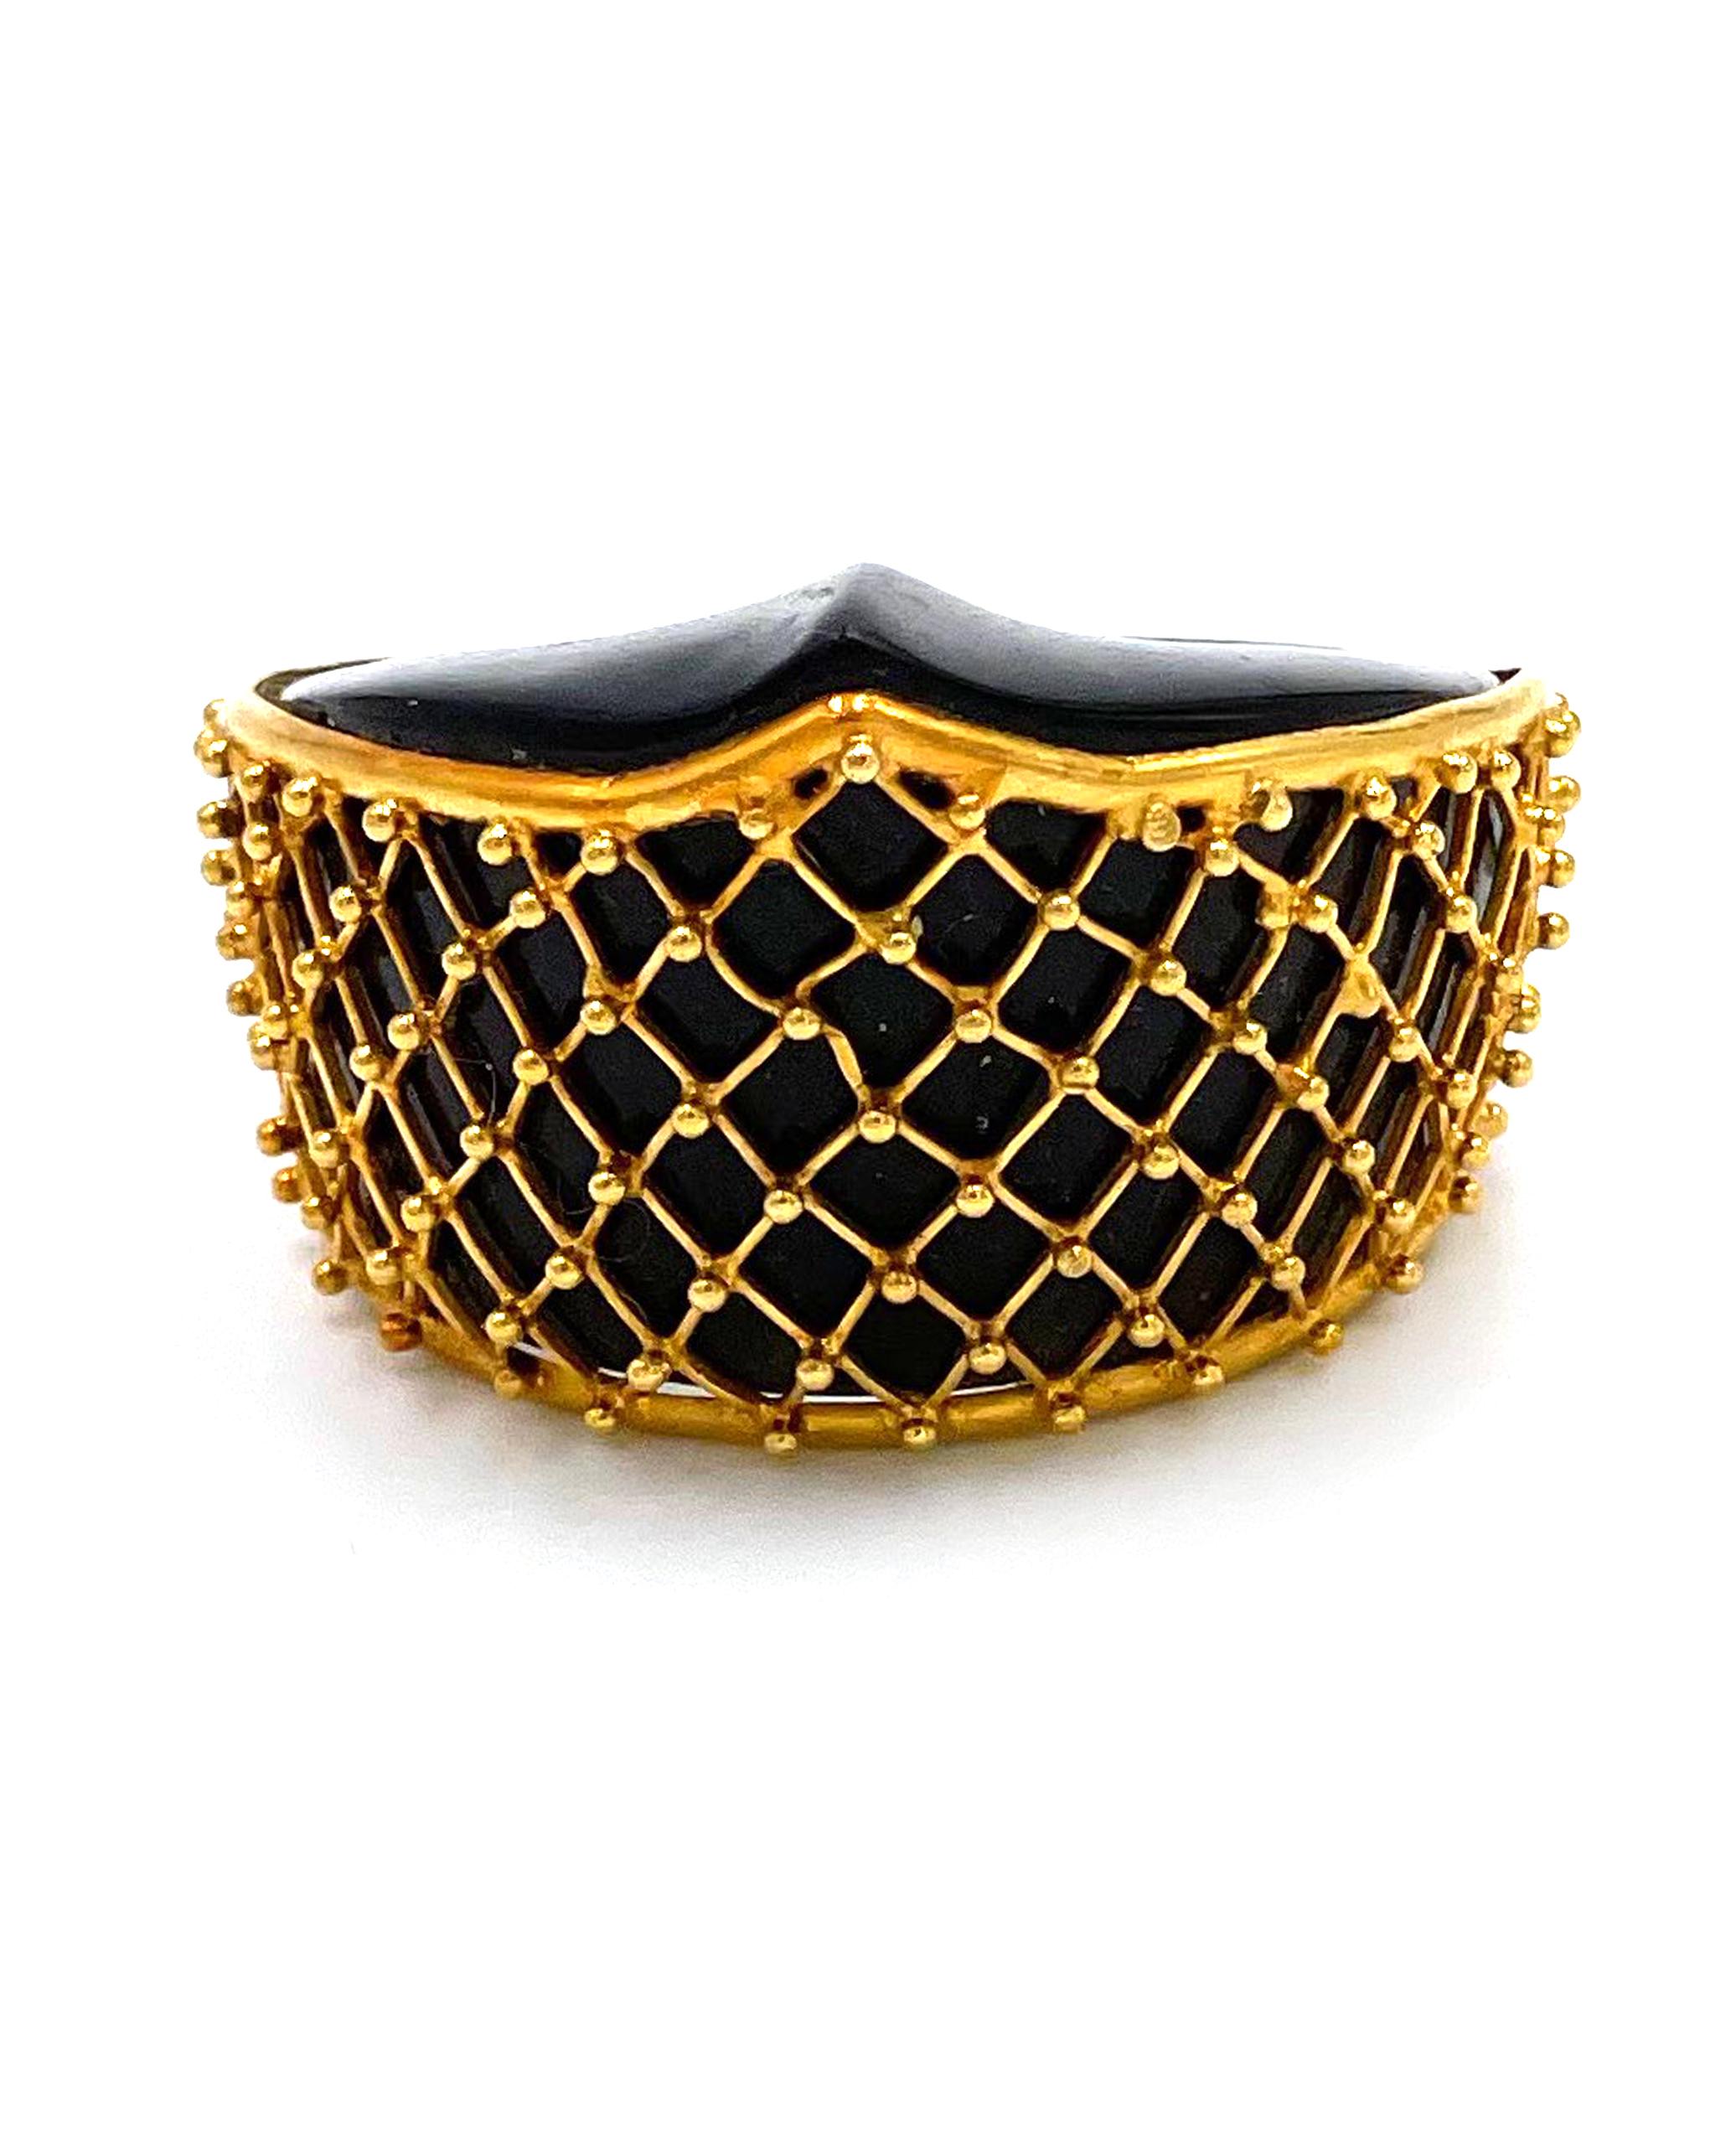 Pre owned vintage estate 18K yellow gold and black glass ring made by Ilias Lalaounis.  The peaked and tapered ring is covered on the top with a netting of 18K yellow gold.  The ring is 22.2mm at the widest point and 8.8mm at the narrowest.  

*